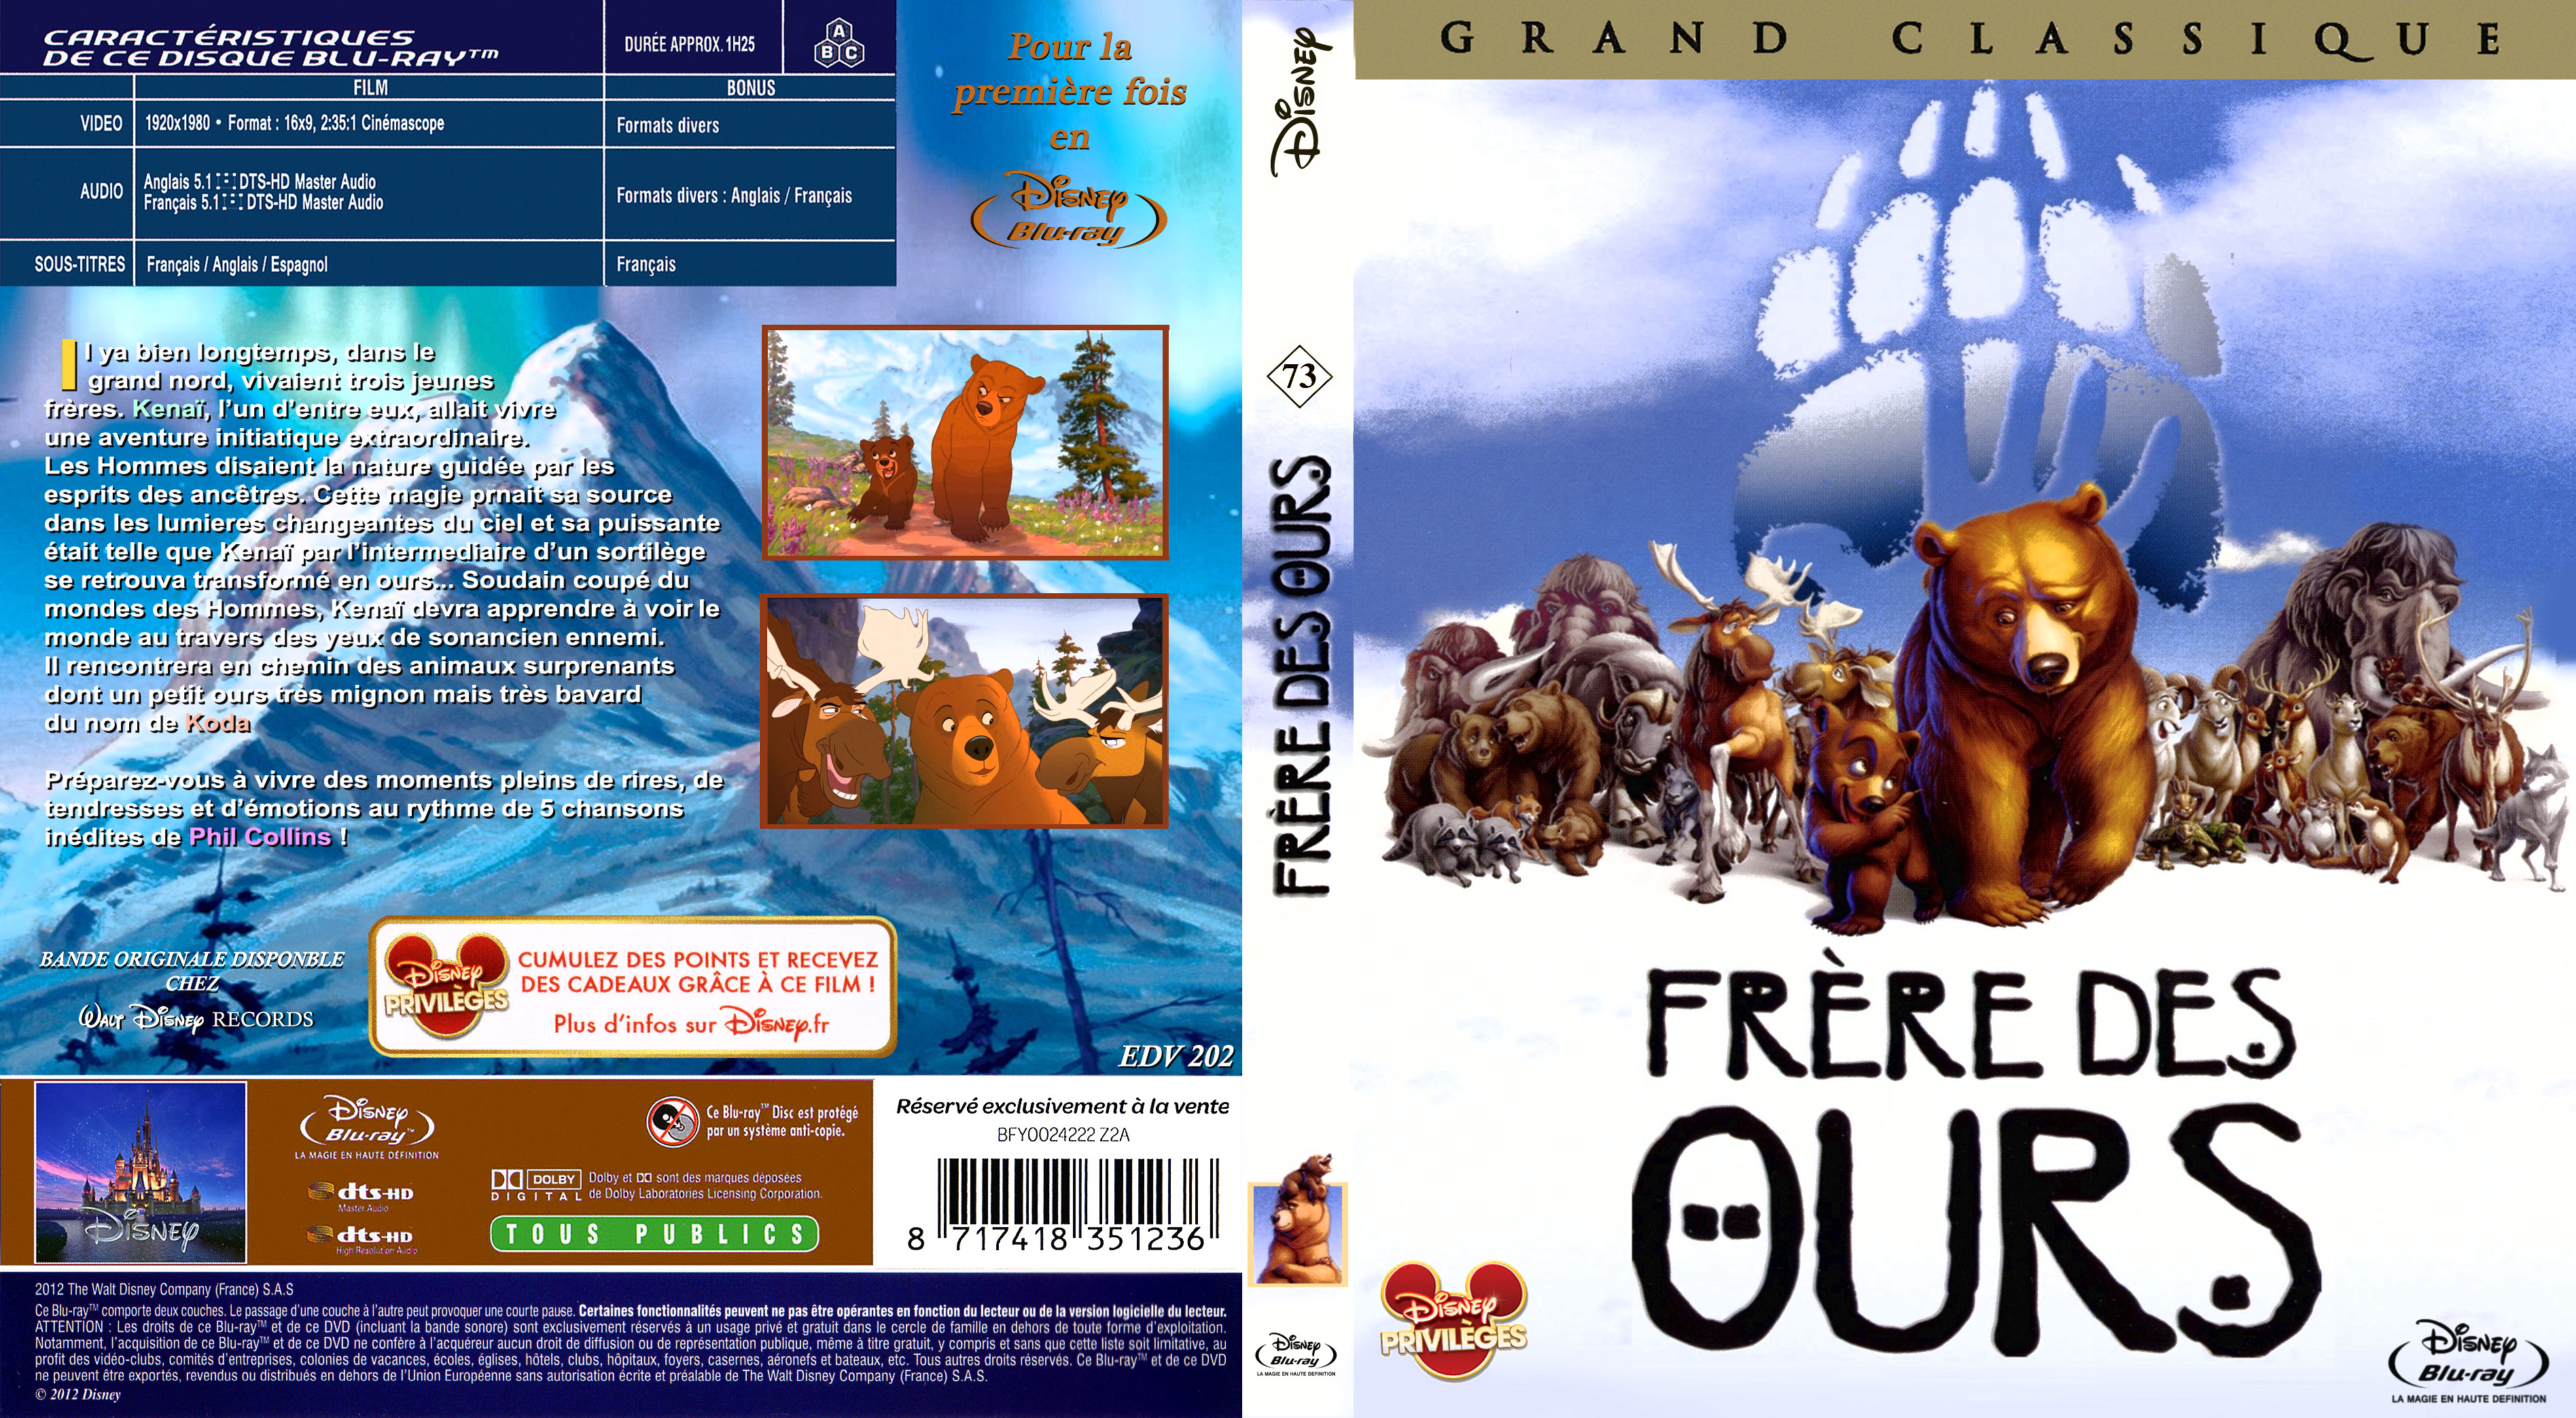 Jaquette DVD Frere des Ours custom (BLU-RAY)